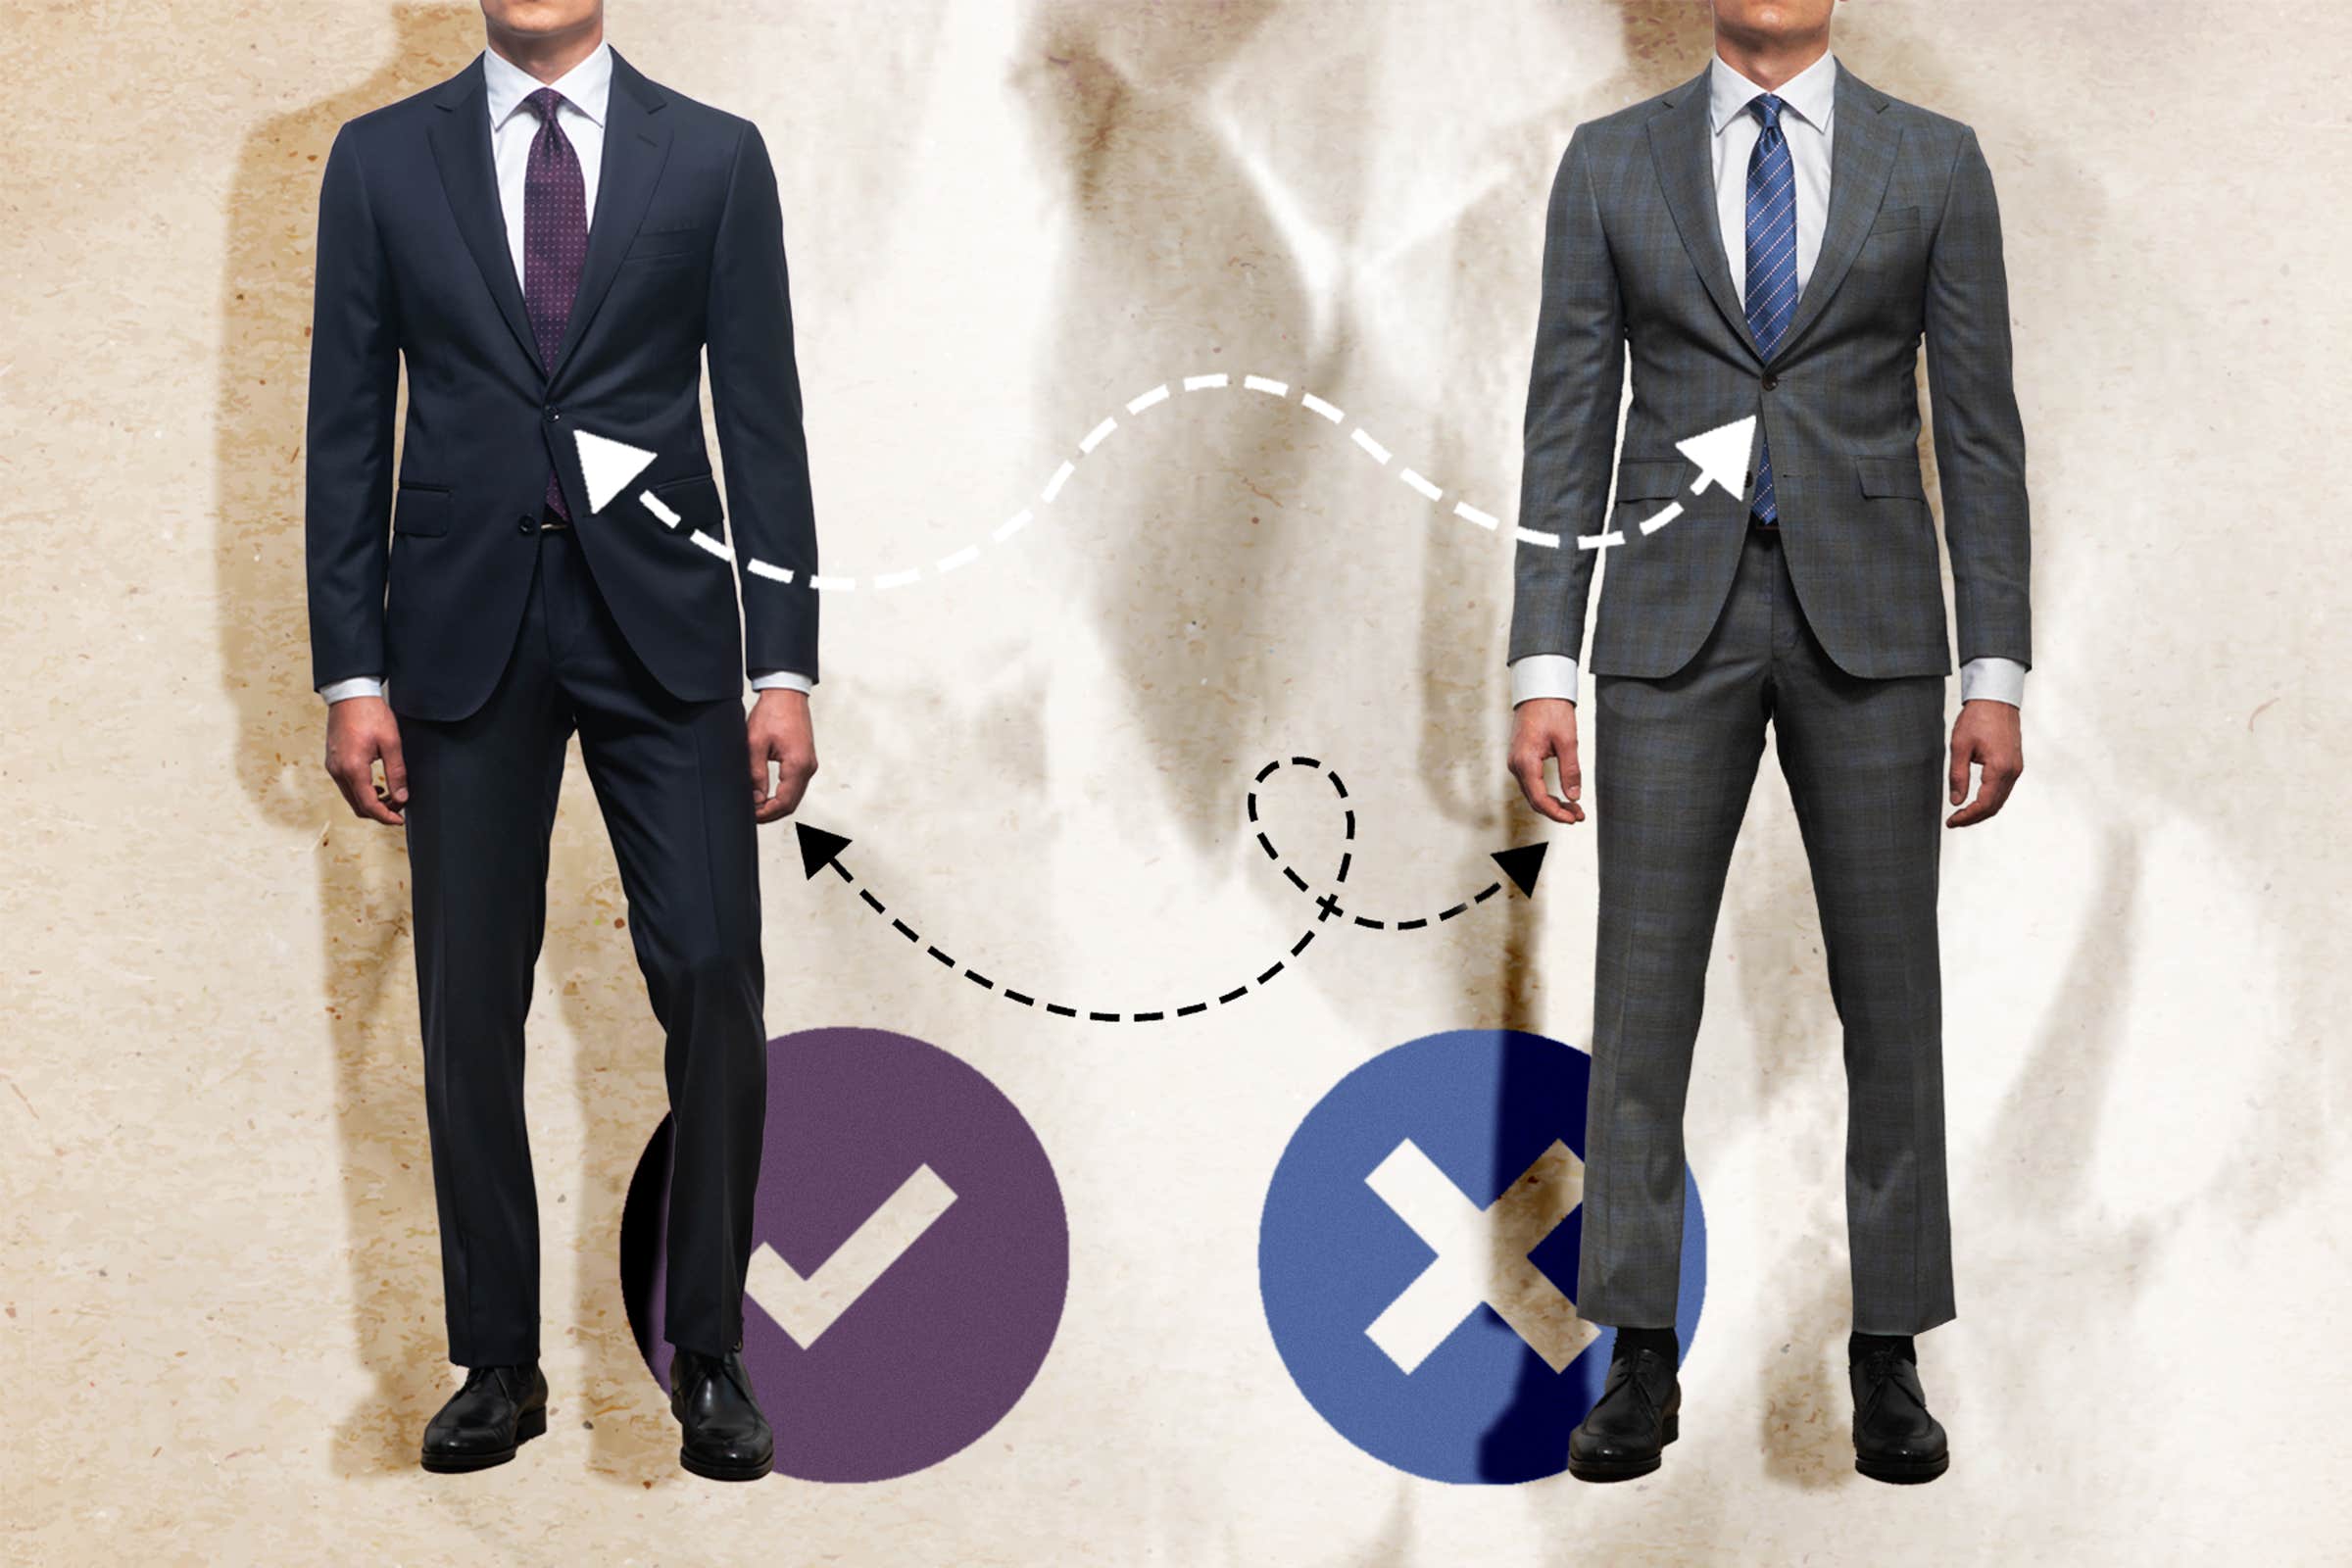 Get your first business suit right with these tips